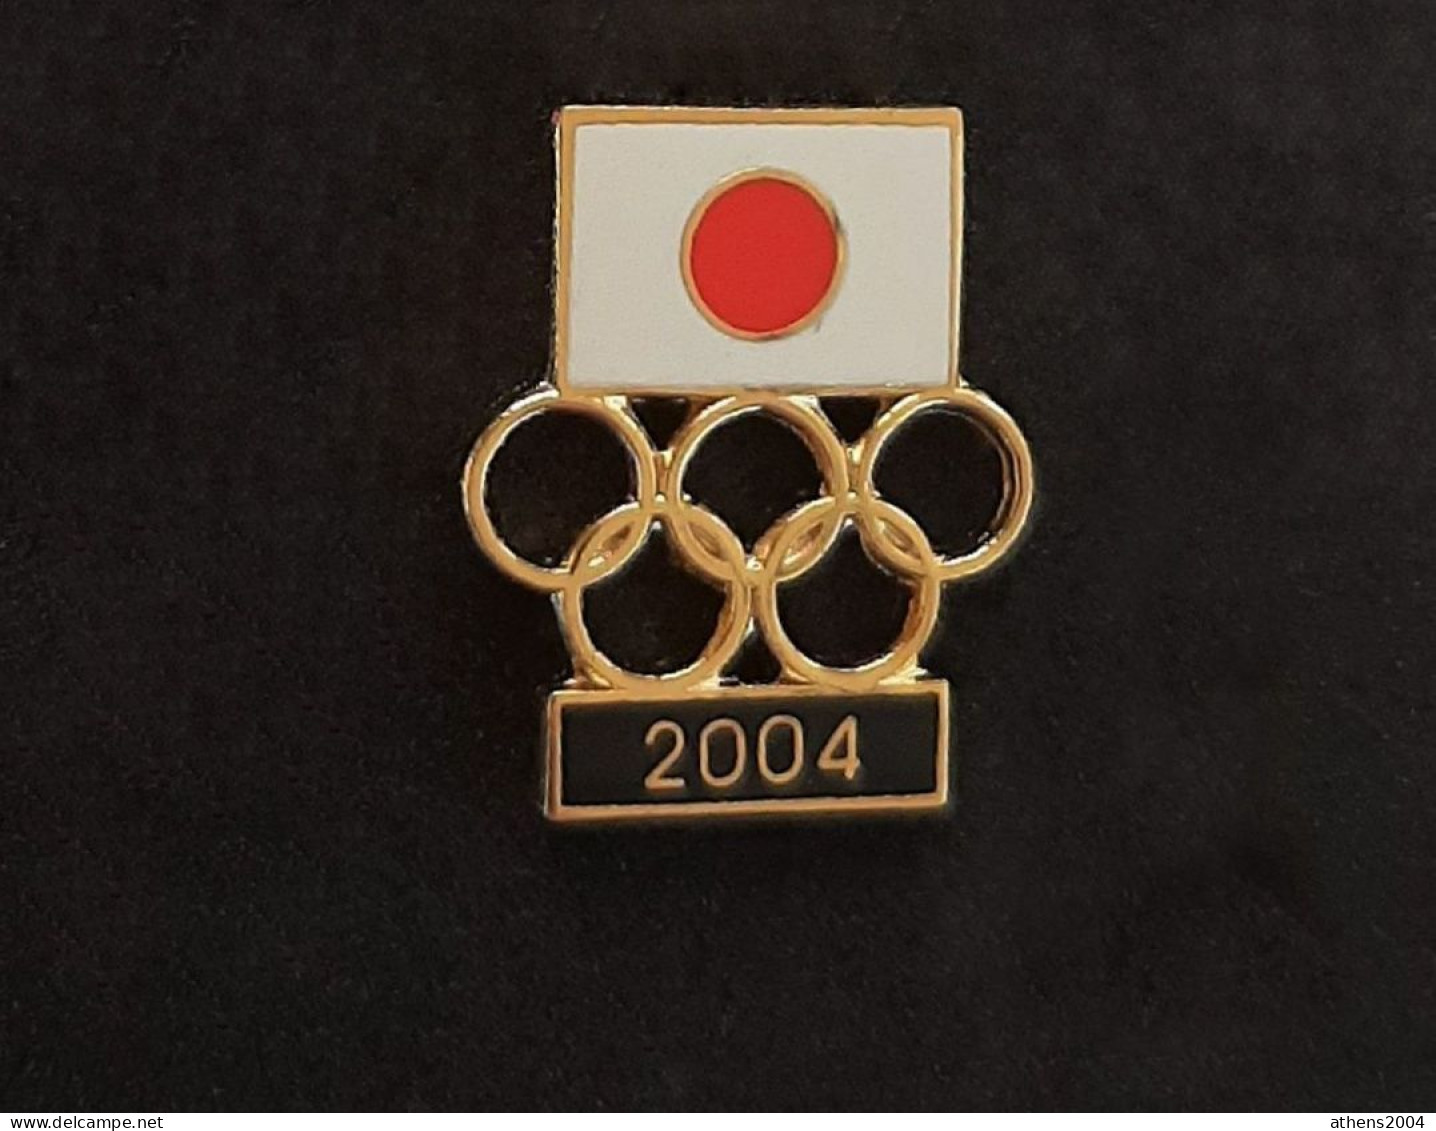 @ Athens 2004 Olympic Games - Japan Dated NOC Pin, Black Version - Olympic Games